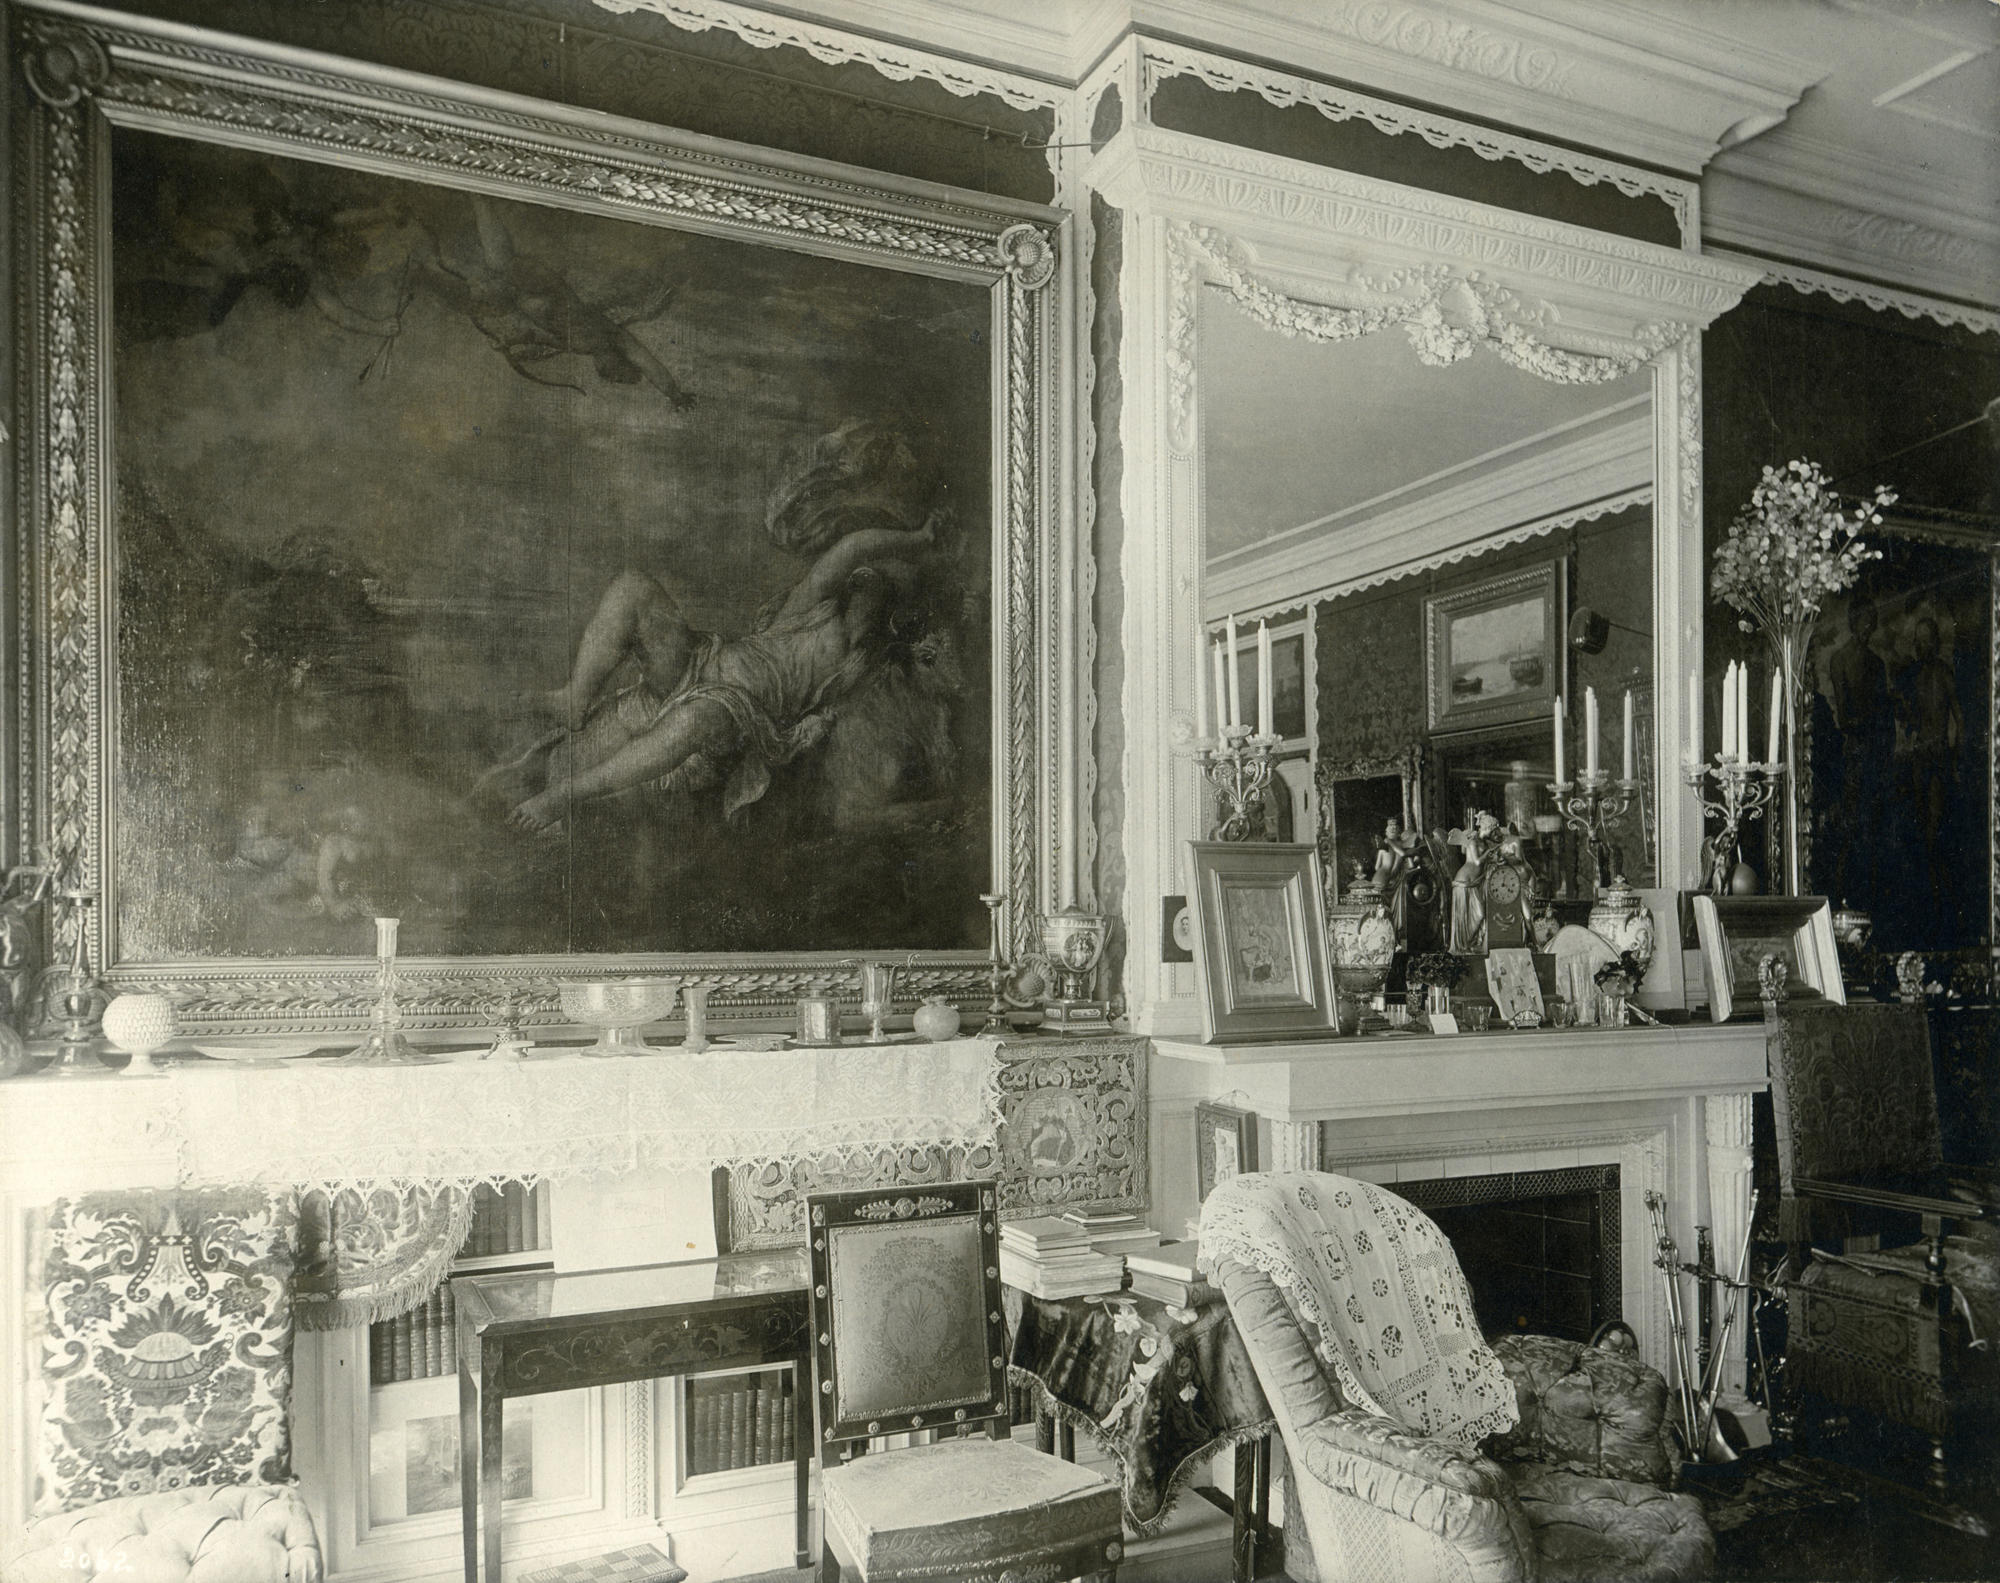 A black and white photo of Isabella Stewart Gardner's personal residence with Titian's Rape of Europa on the wall. 